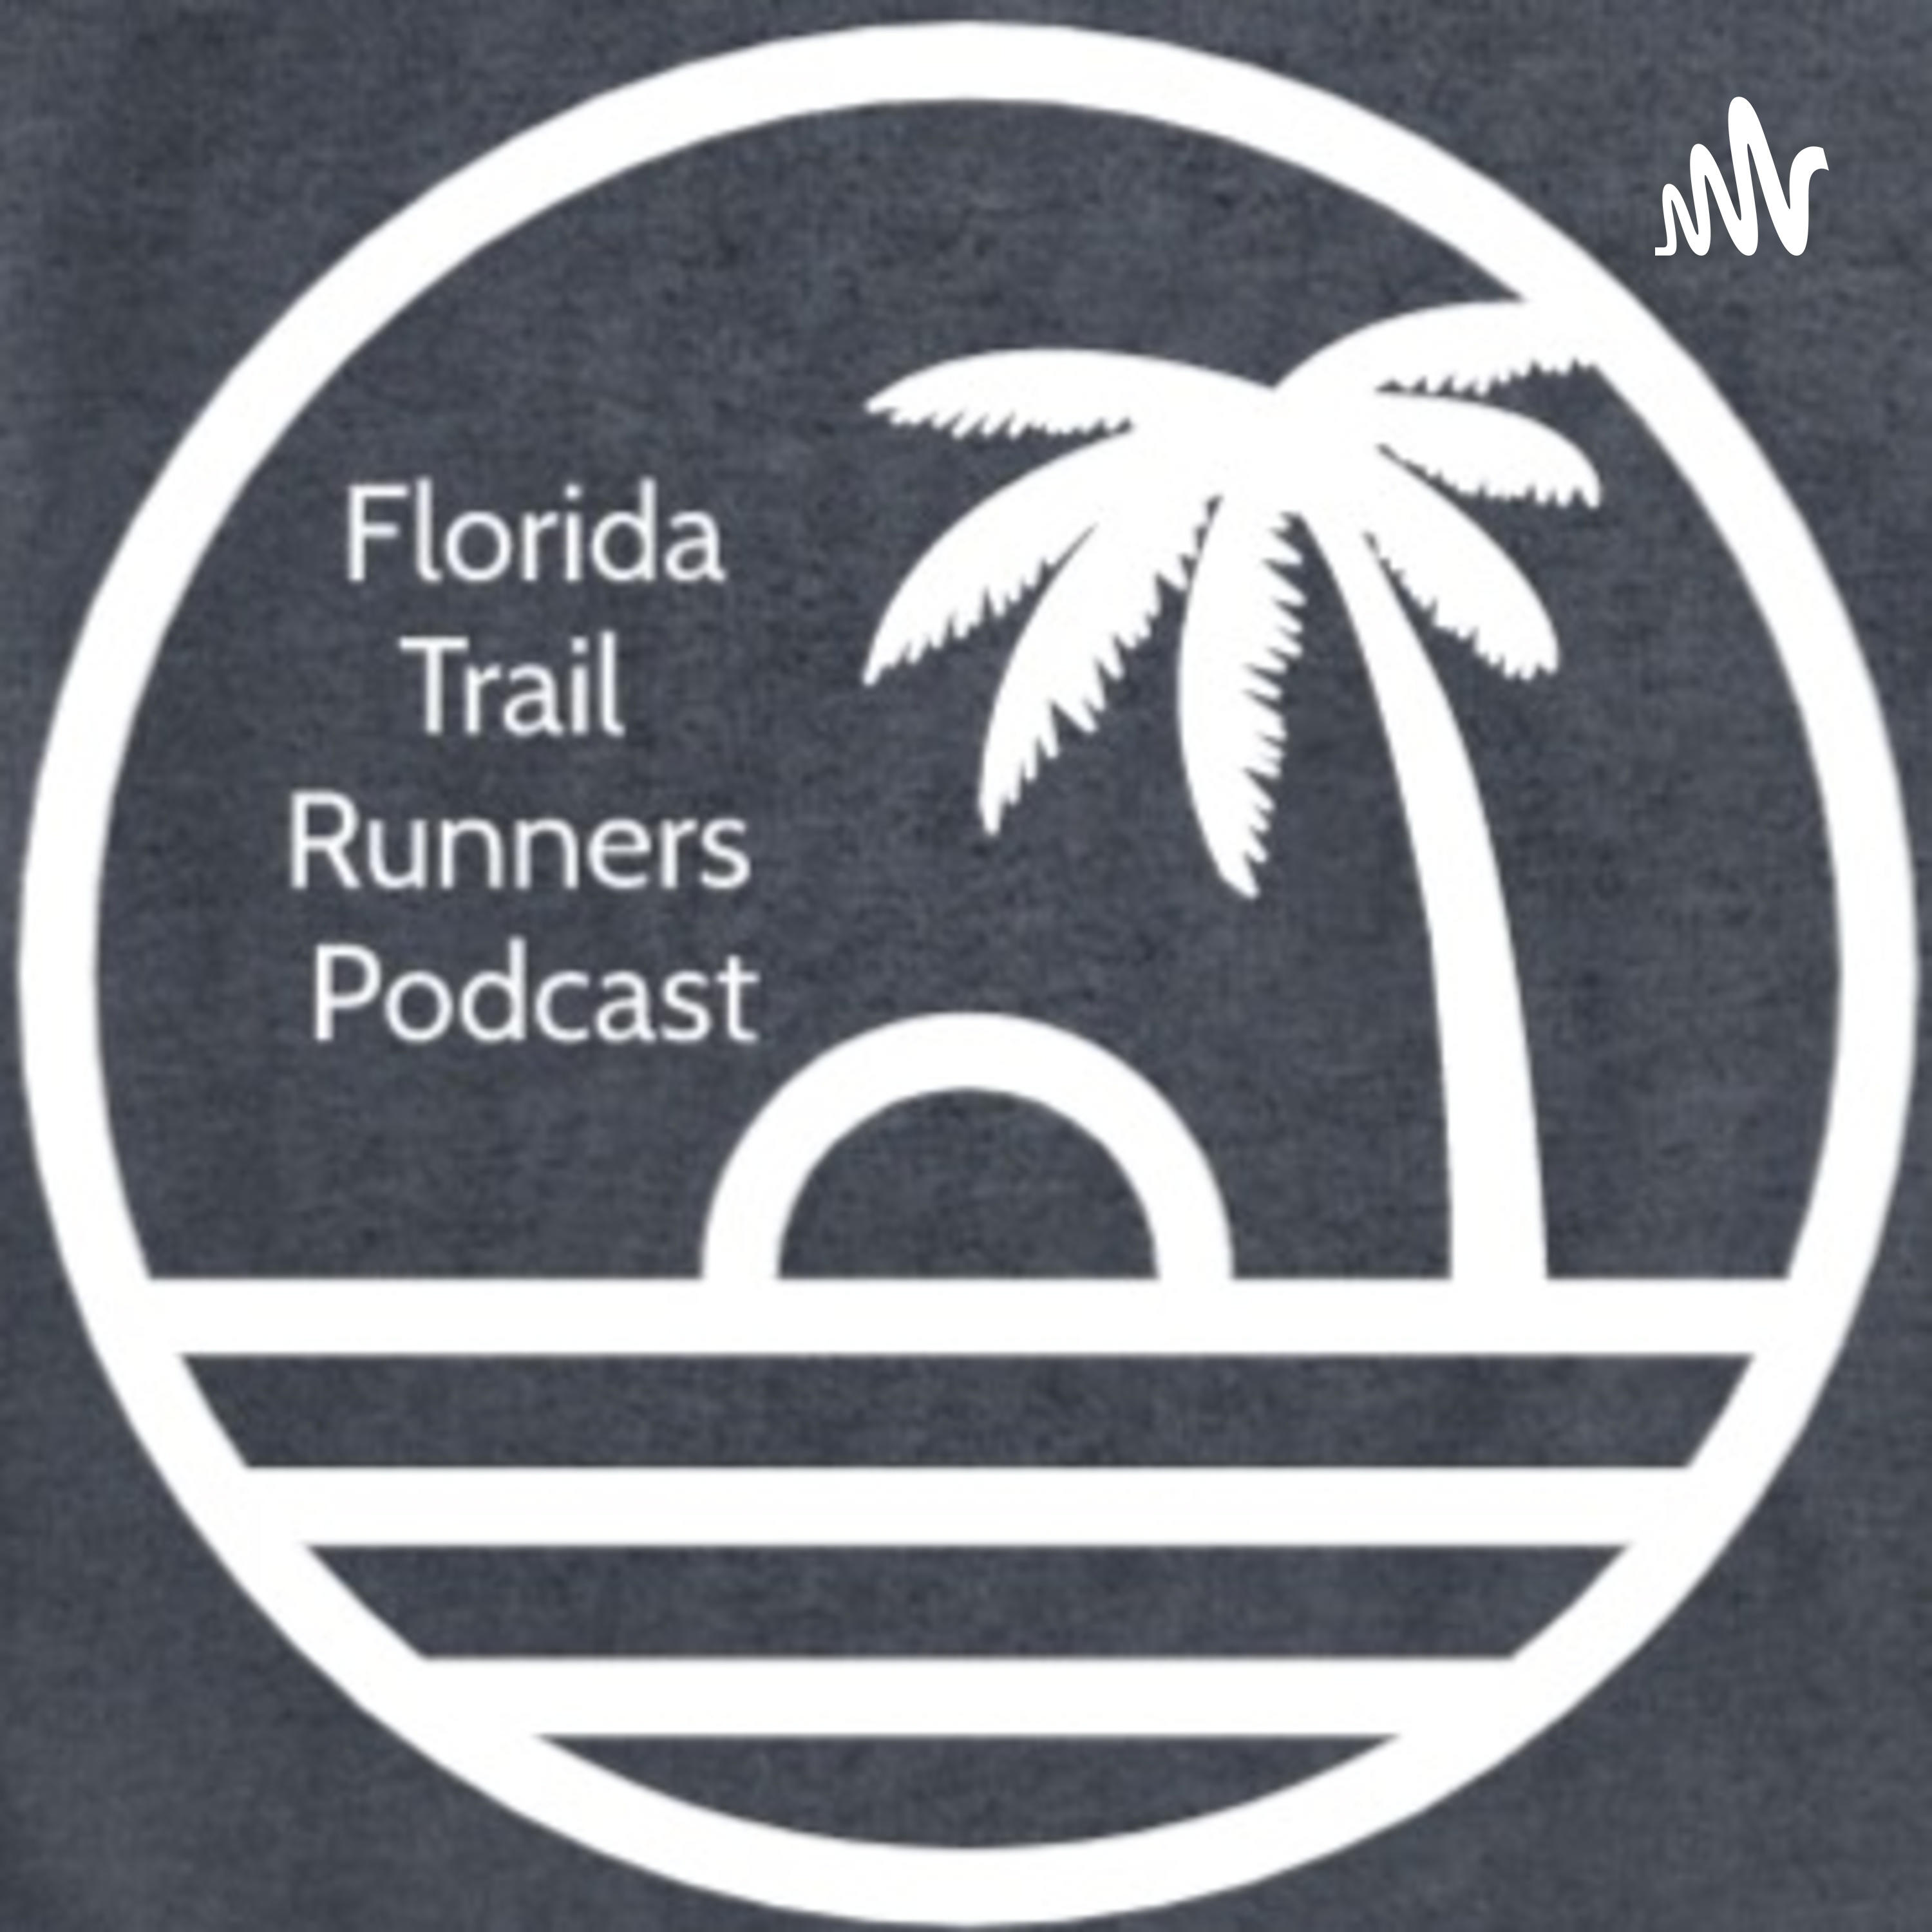 Florida Trail Runners Podcast iHeart